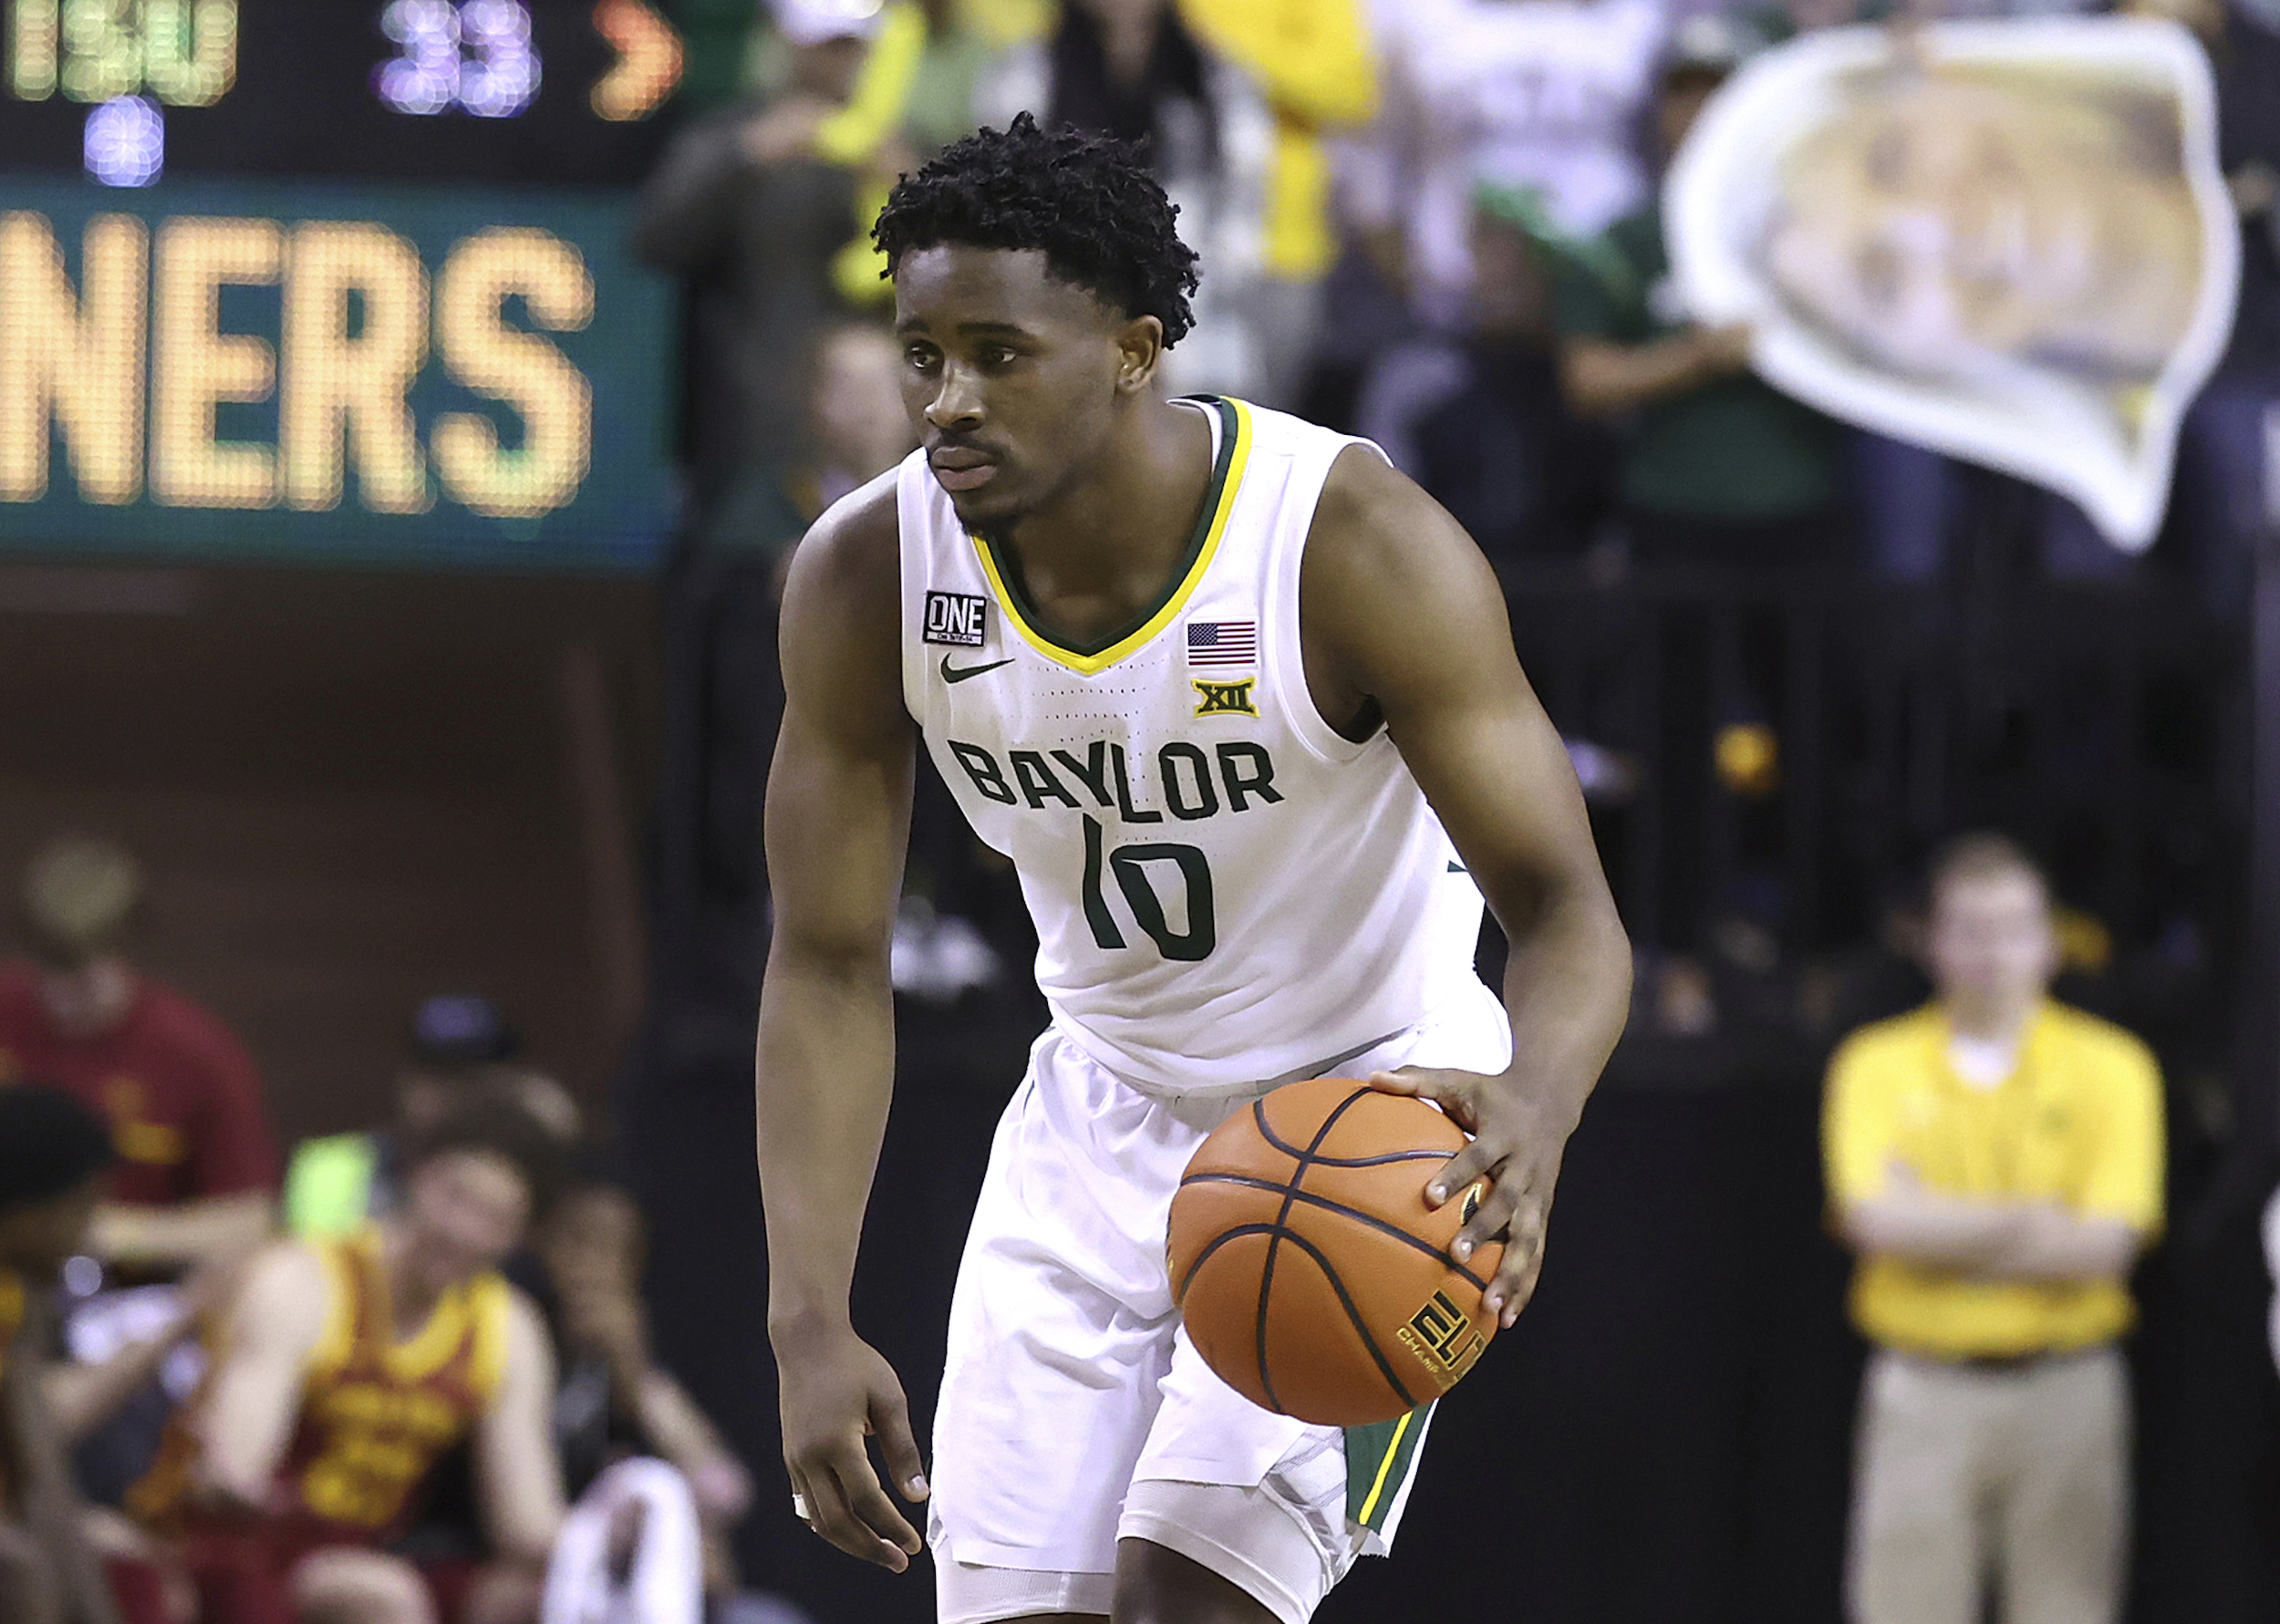 Baylor-Creighton live stream (3/19) How to watch March Madness online, TV, time